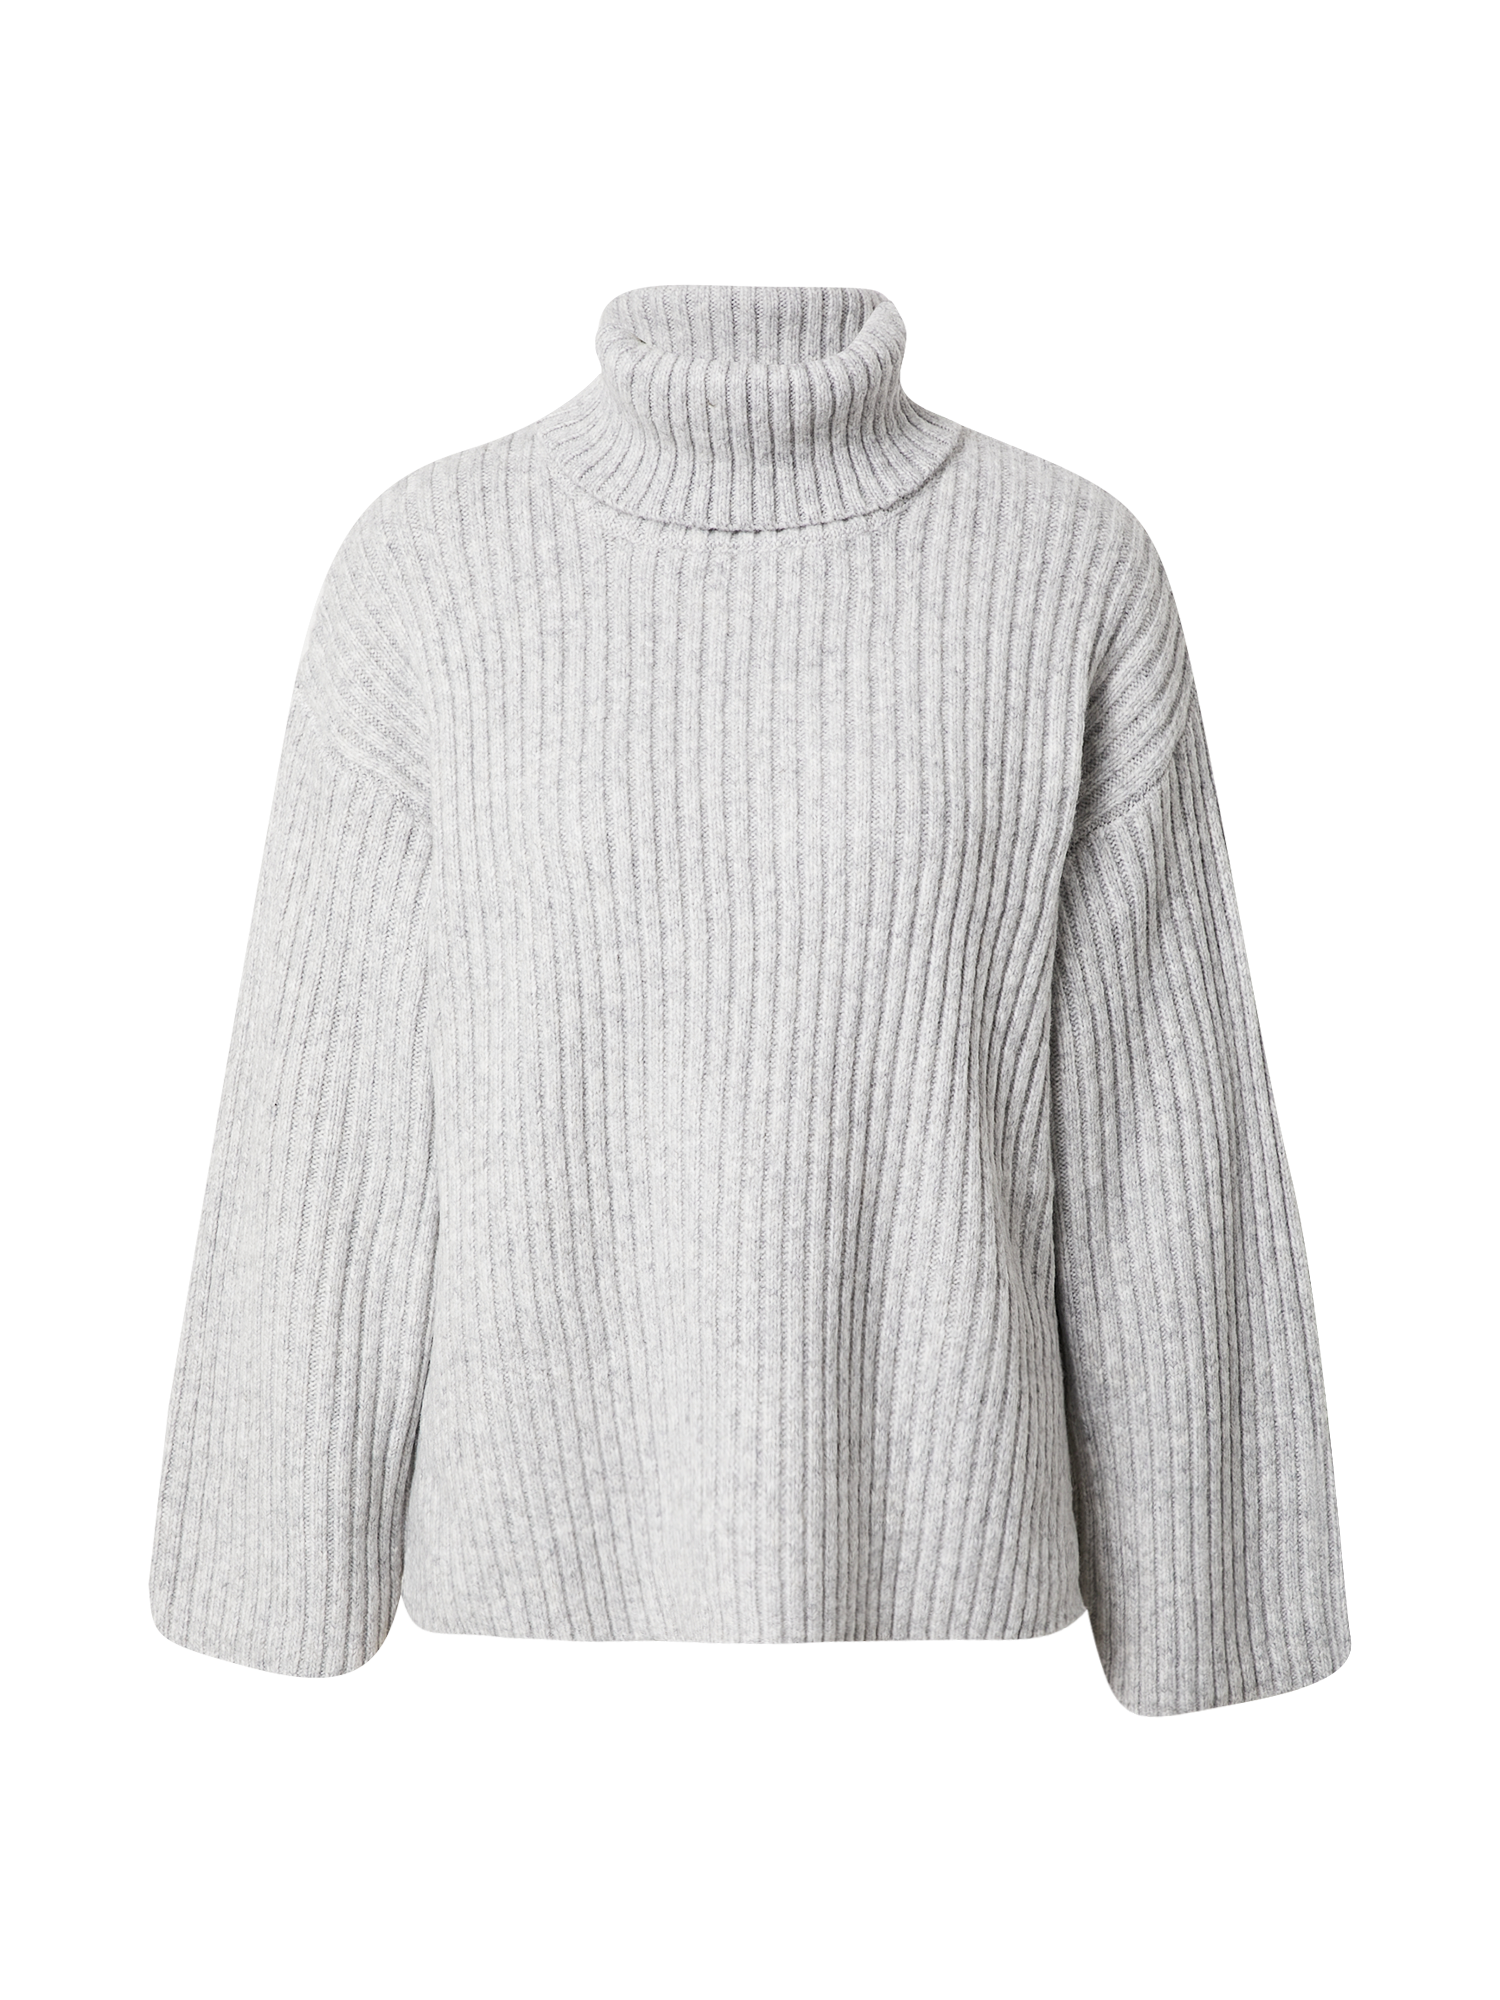 Pull-over Tessa Gina Tricot en Gris Clair 